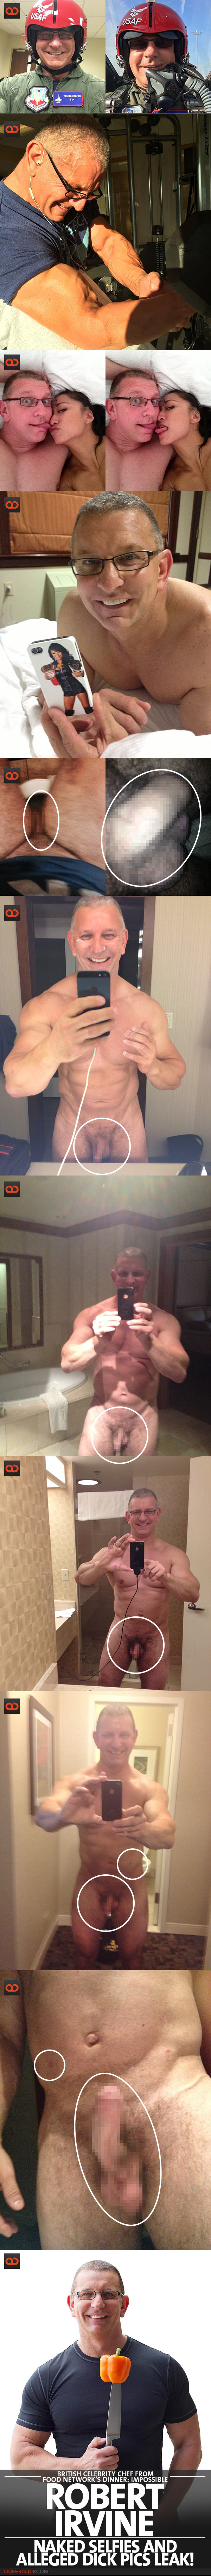 Robert Irvine, British Celebrity Chef From Food Network Dinner Impossible, Naked Selfies And Alleged Dick Pics Leak!